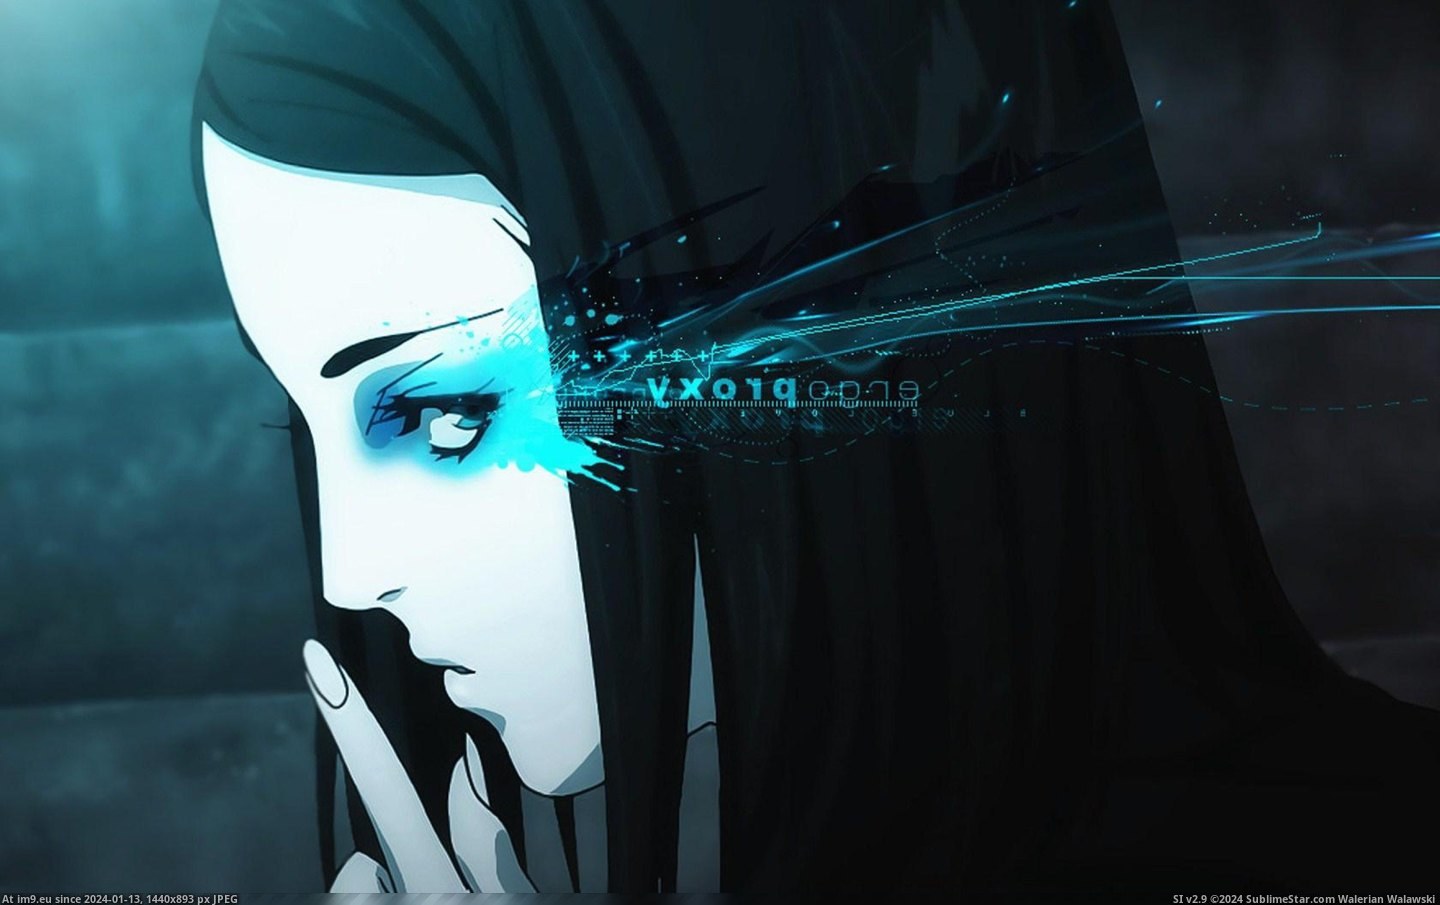 #Wallpaper #Ergo #Proxy Ergo Proxy Wallpaper 3 (HD) Pic. (Изображение из альбом HD Wallpapers - anime, games and abstract art/3D backgrounds))